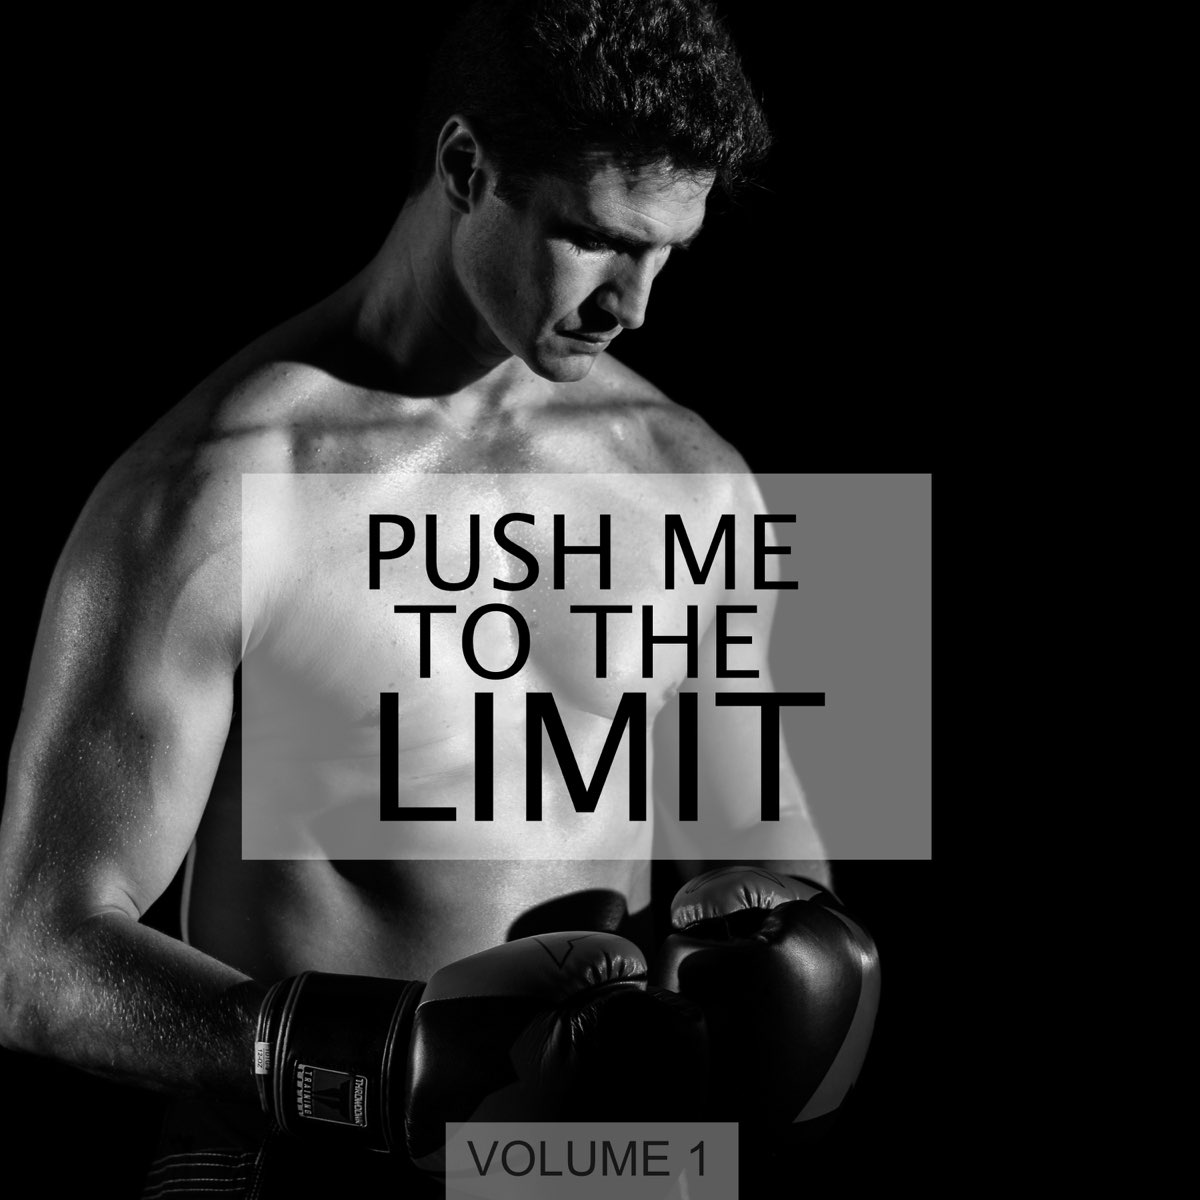 Pushing me to the limit. Push it to the limit. Various artists - the Dark Side. Картинки don't Push one me на рабочий стол. Push me like